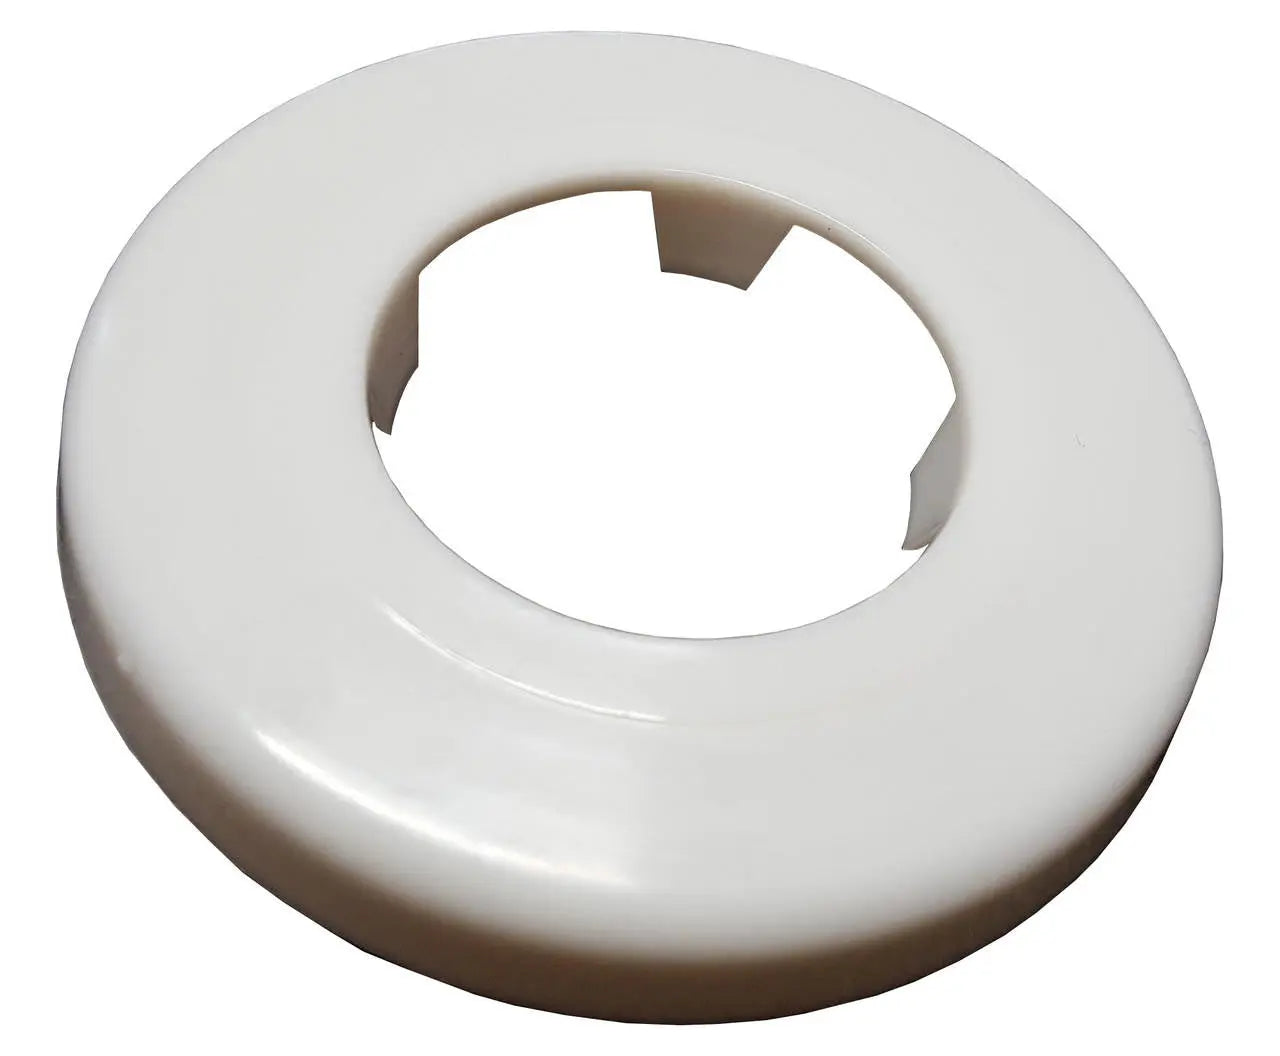 40mm White Rosette Collar Pipe Cover for Holes Gaps Hiding Pipe Covers